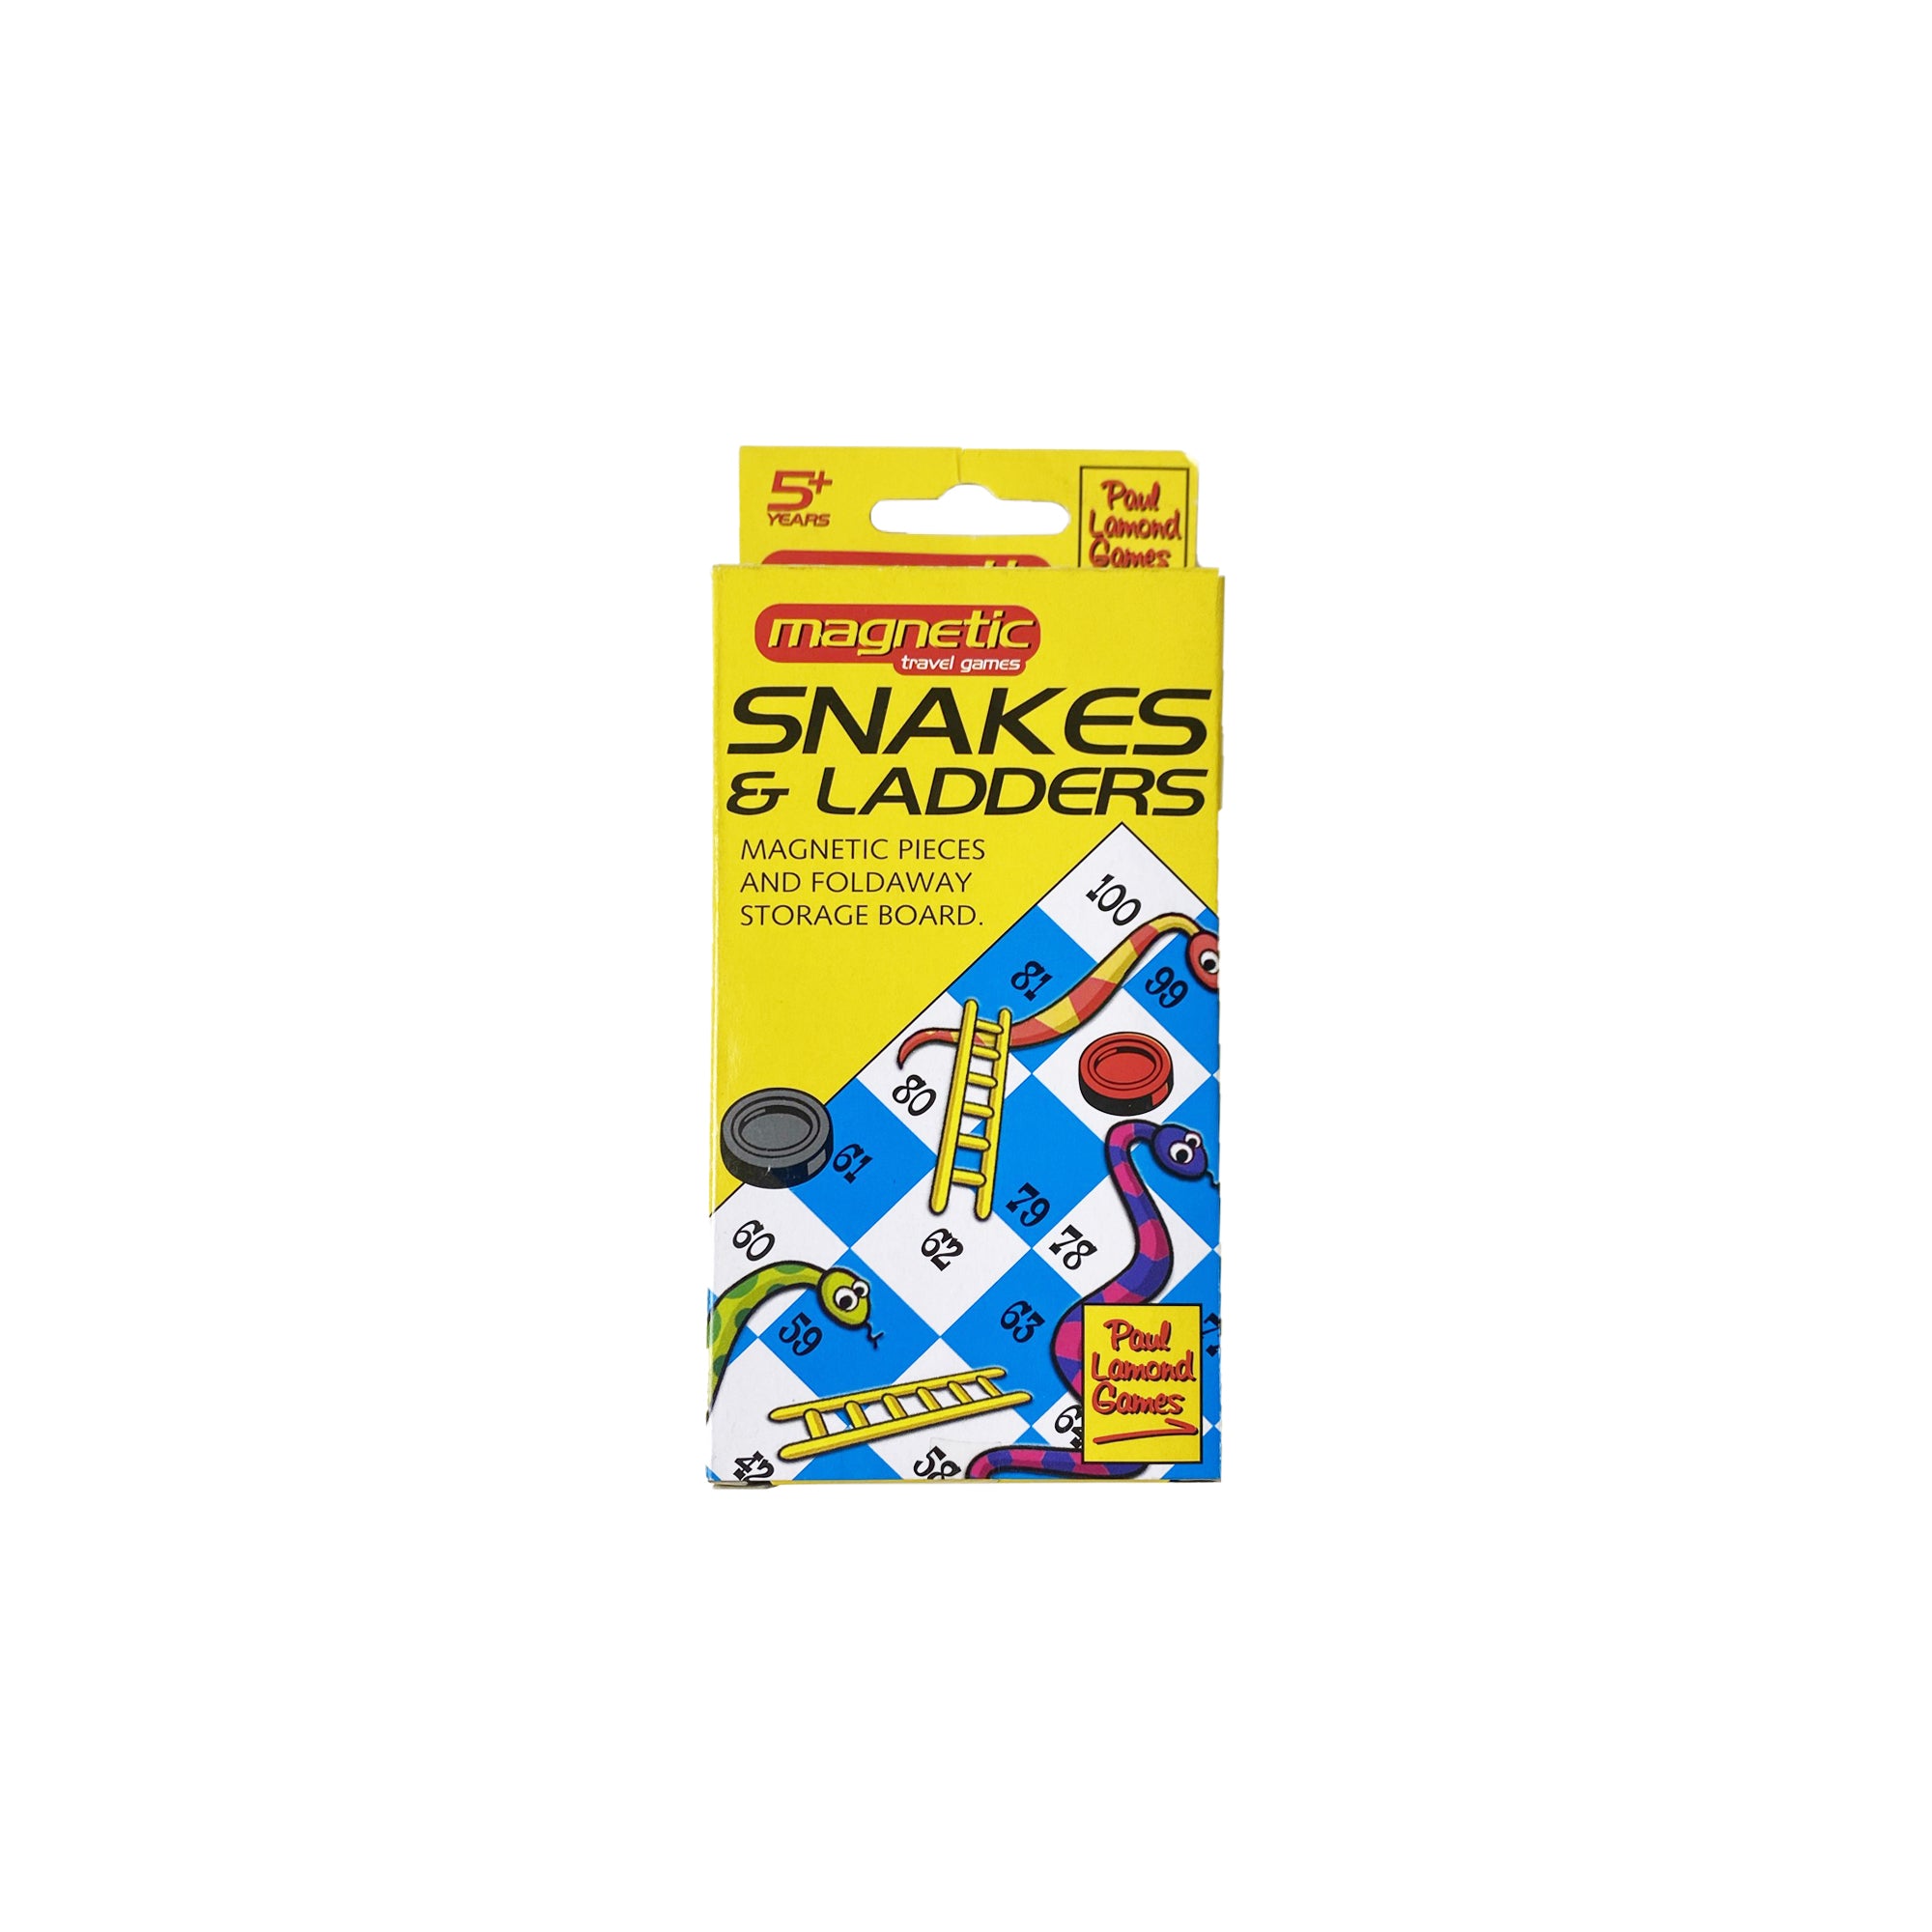 Magnetic Snakes & Ladders Travel Game